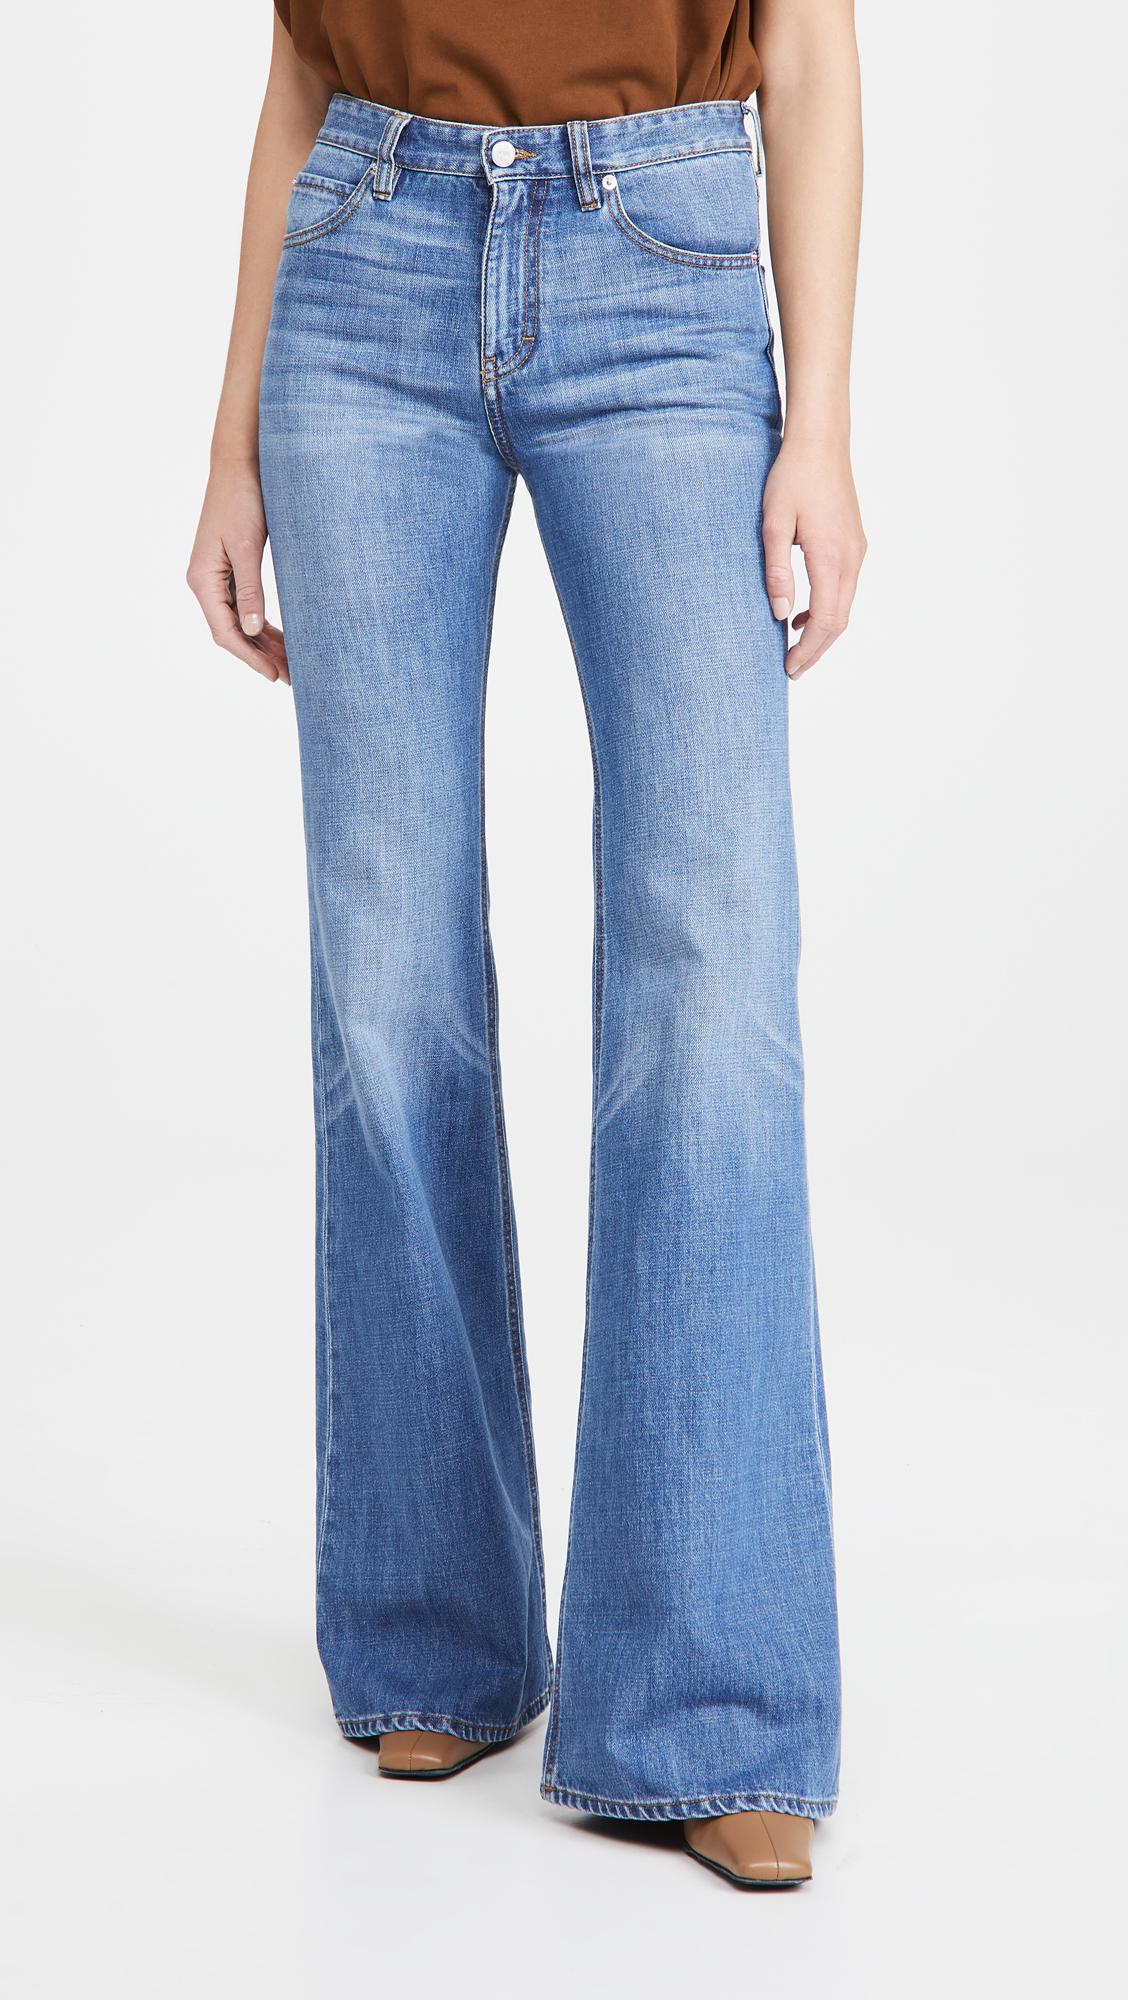 Womens Clothing Jeans Wide-leg jeans Victoria Victoria Beckham Denim High-rise Wide-leg Jeans in Natural 